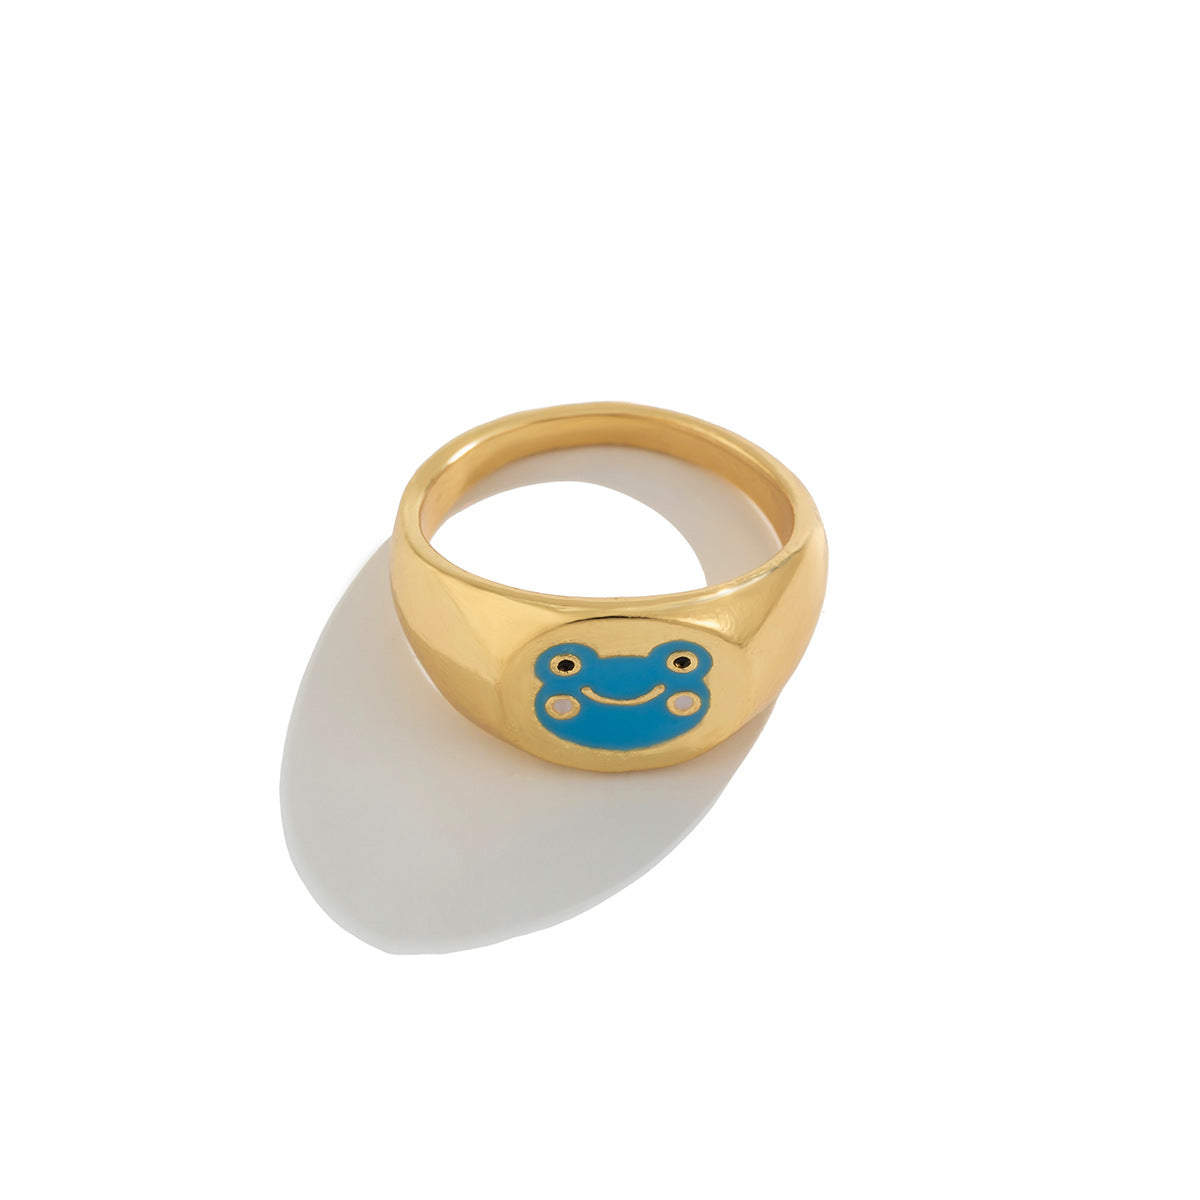 Froggy Colorful Ring with Geometric Hand Ornament